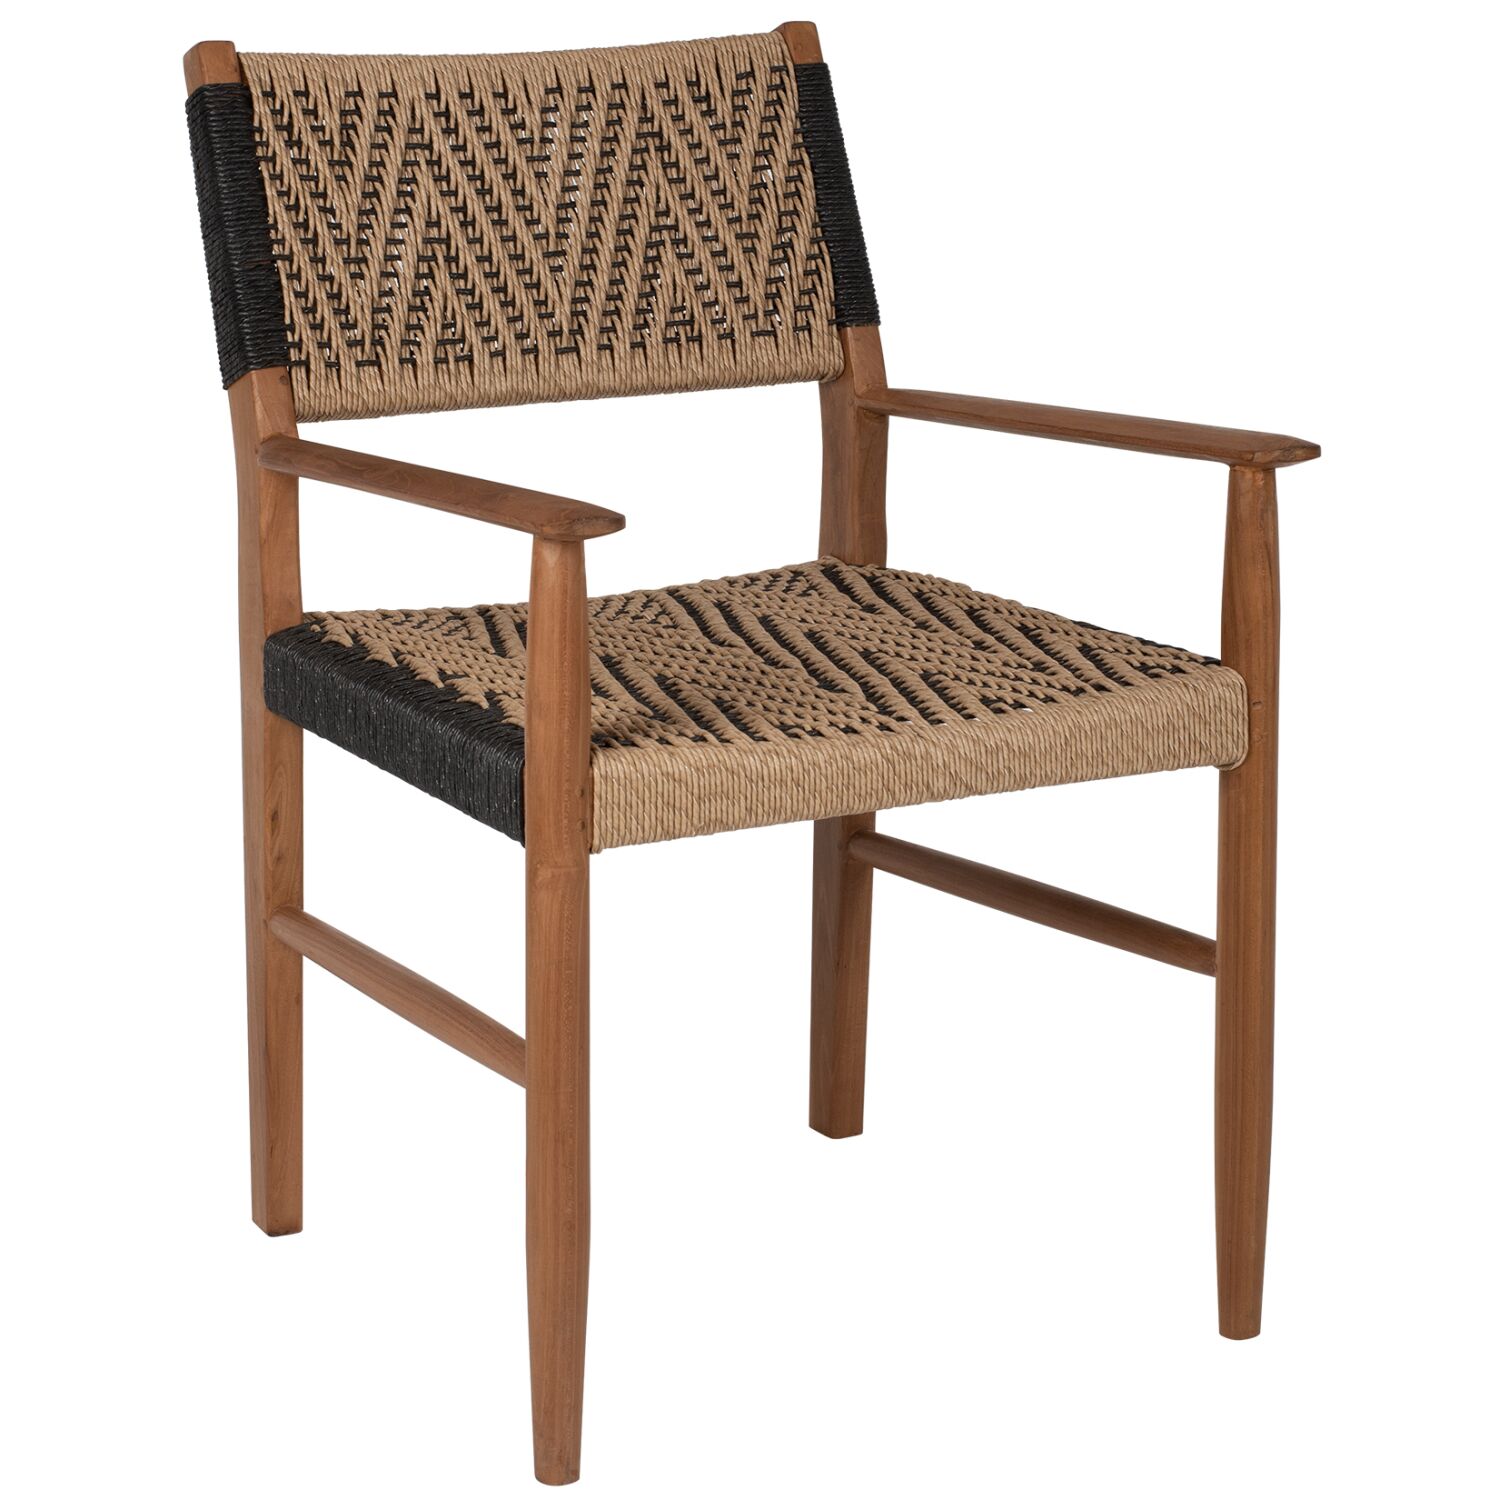 DINING ARMCHAIR TEAK WOOD SYNTHETIC ROPE 57x66x86Hcm.HM9383.01